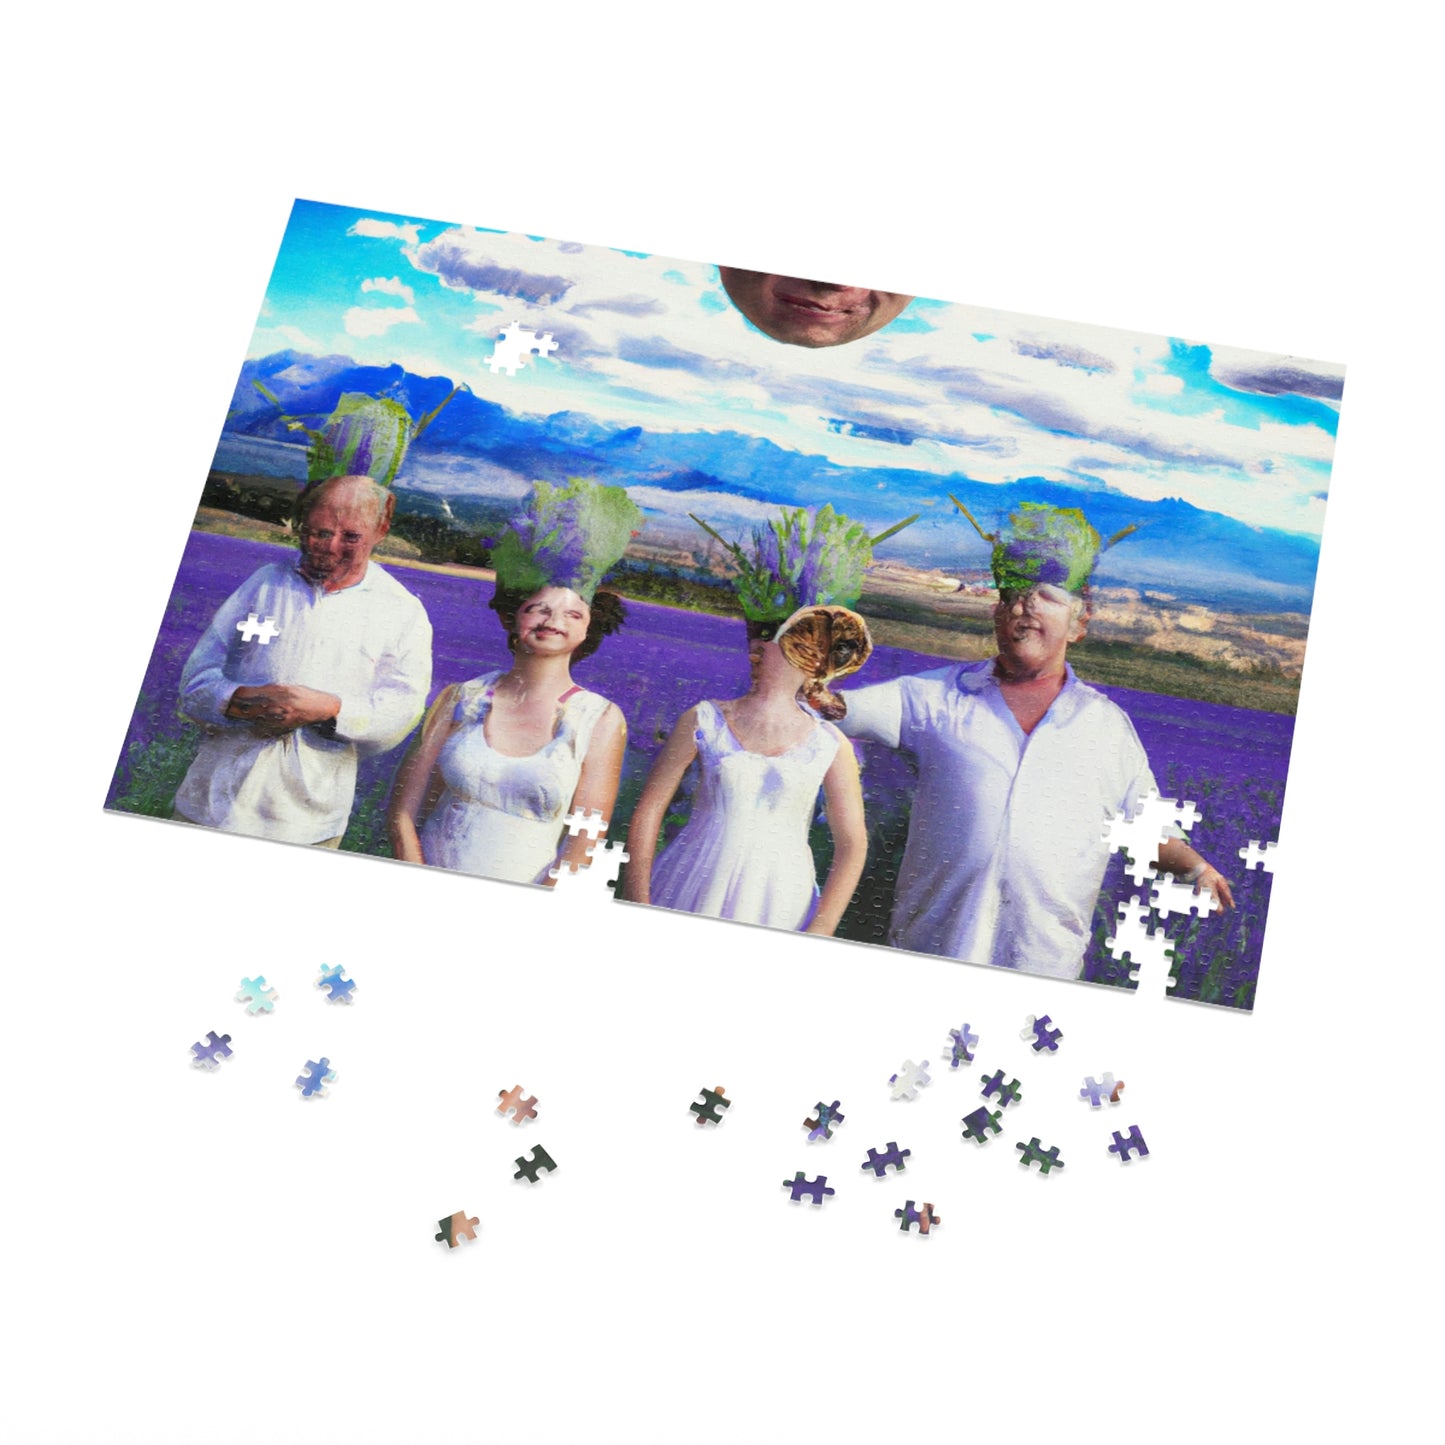 "Lavender Family Reunion: A Blooming Celebration" - The Alien Jigsaw Puzzle